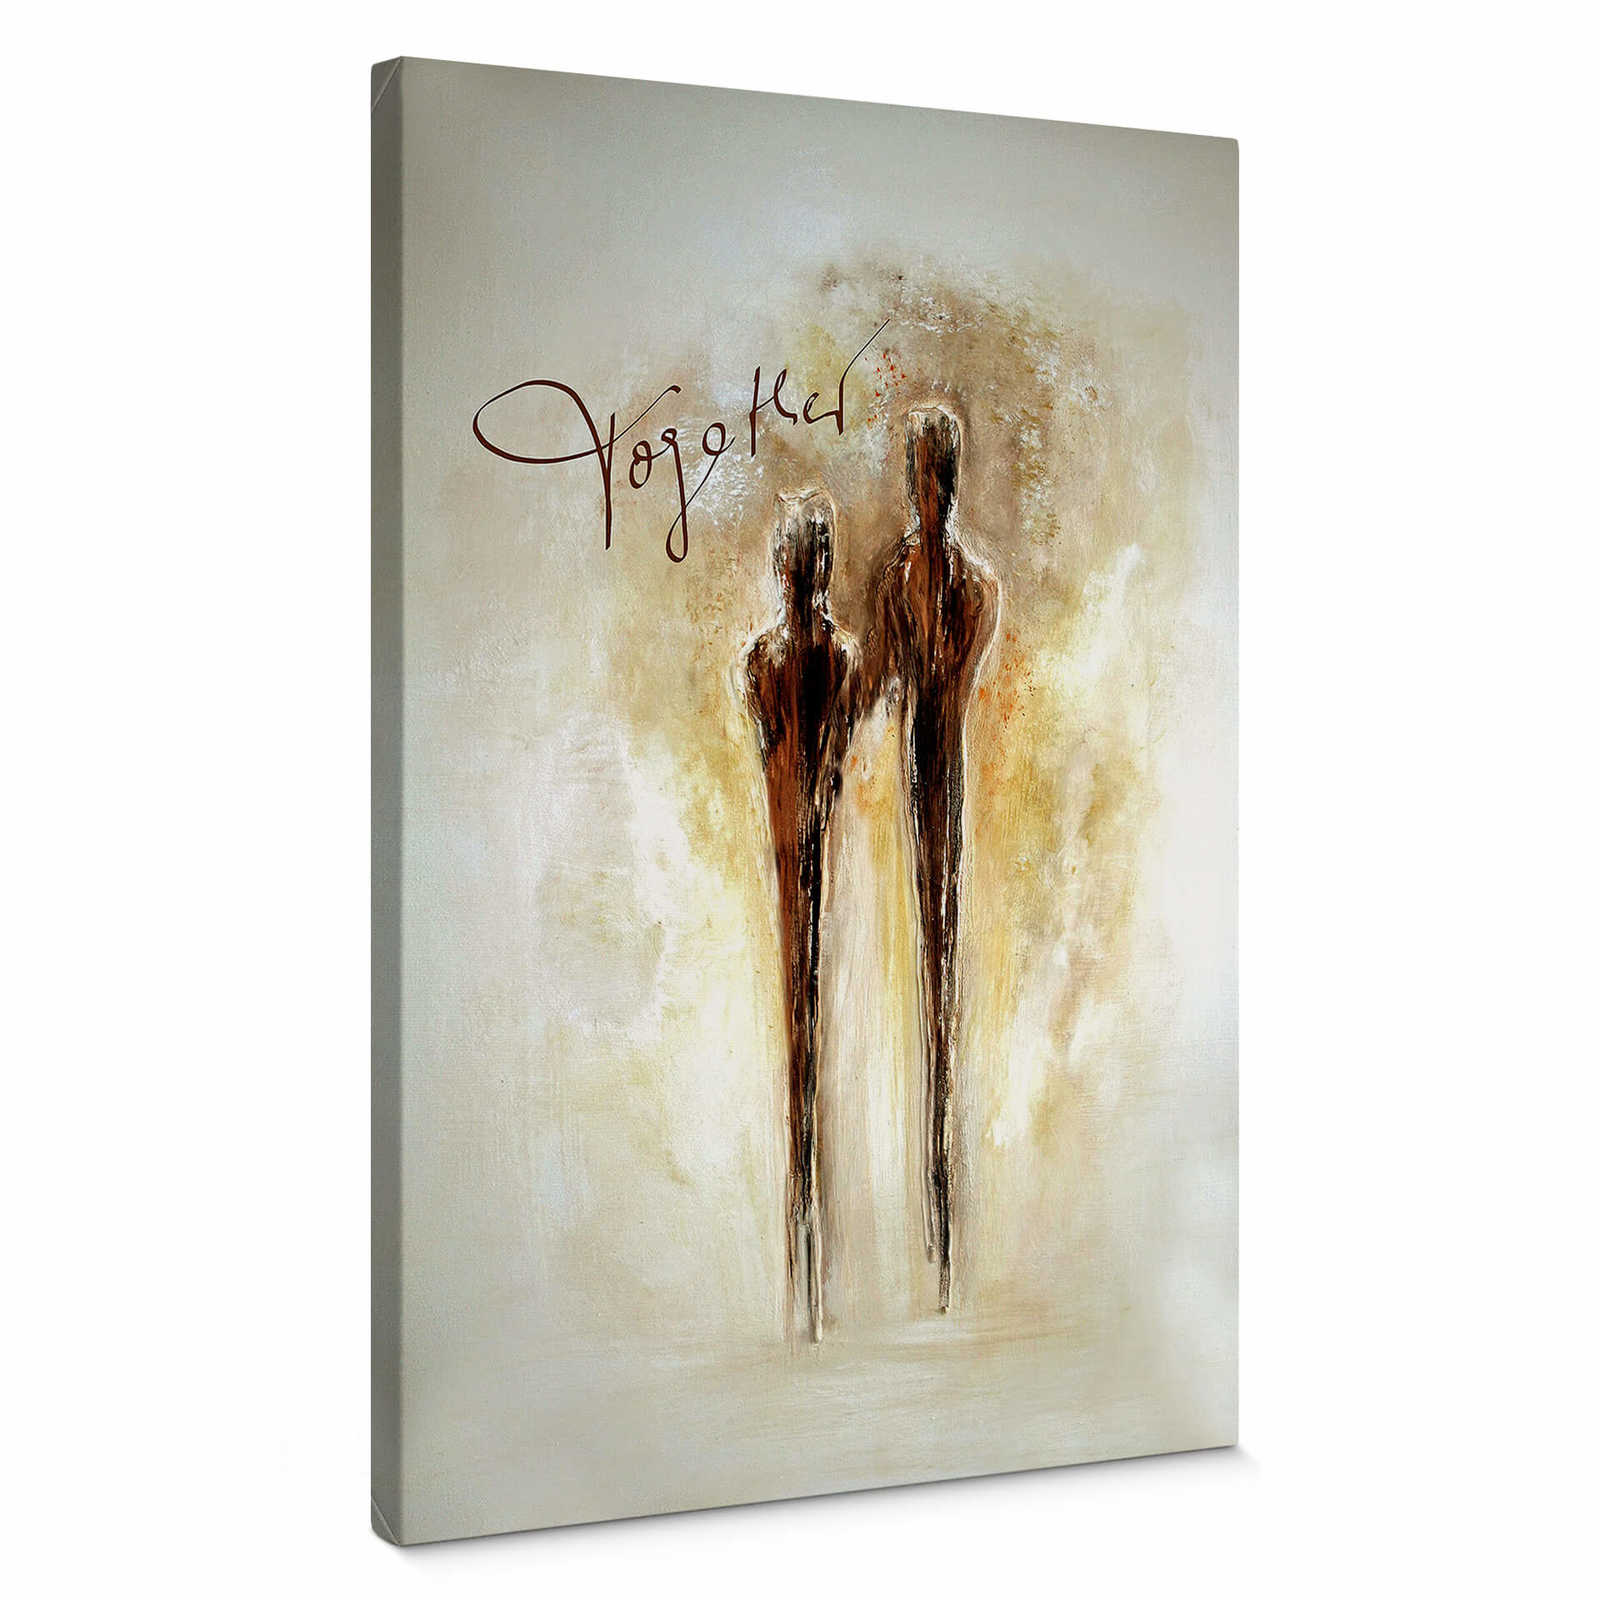         Canvas print art by Tina Melz "Together", portrait format
    